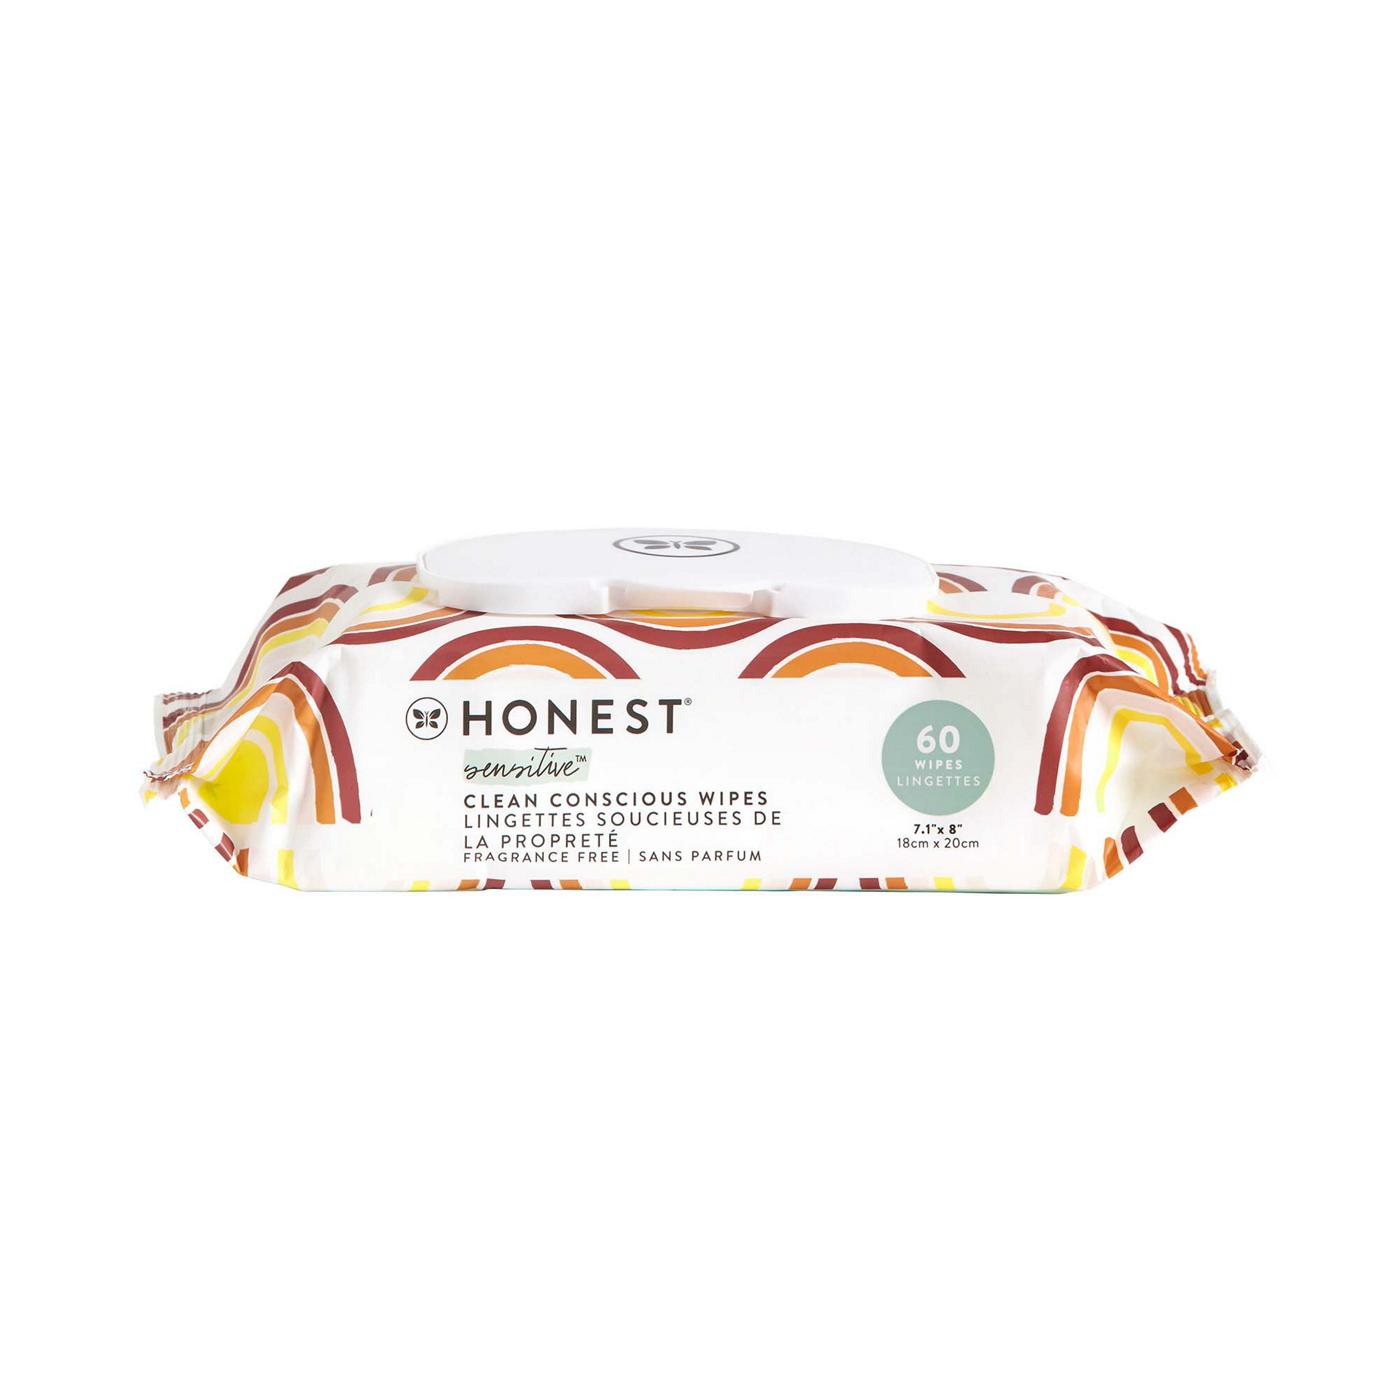 The Honest Company Sensitive Baby Wipes; image 1 of 3